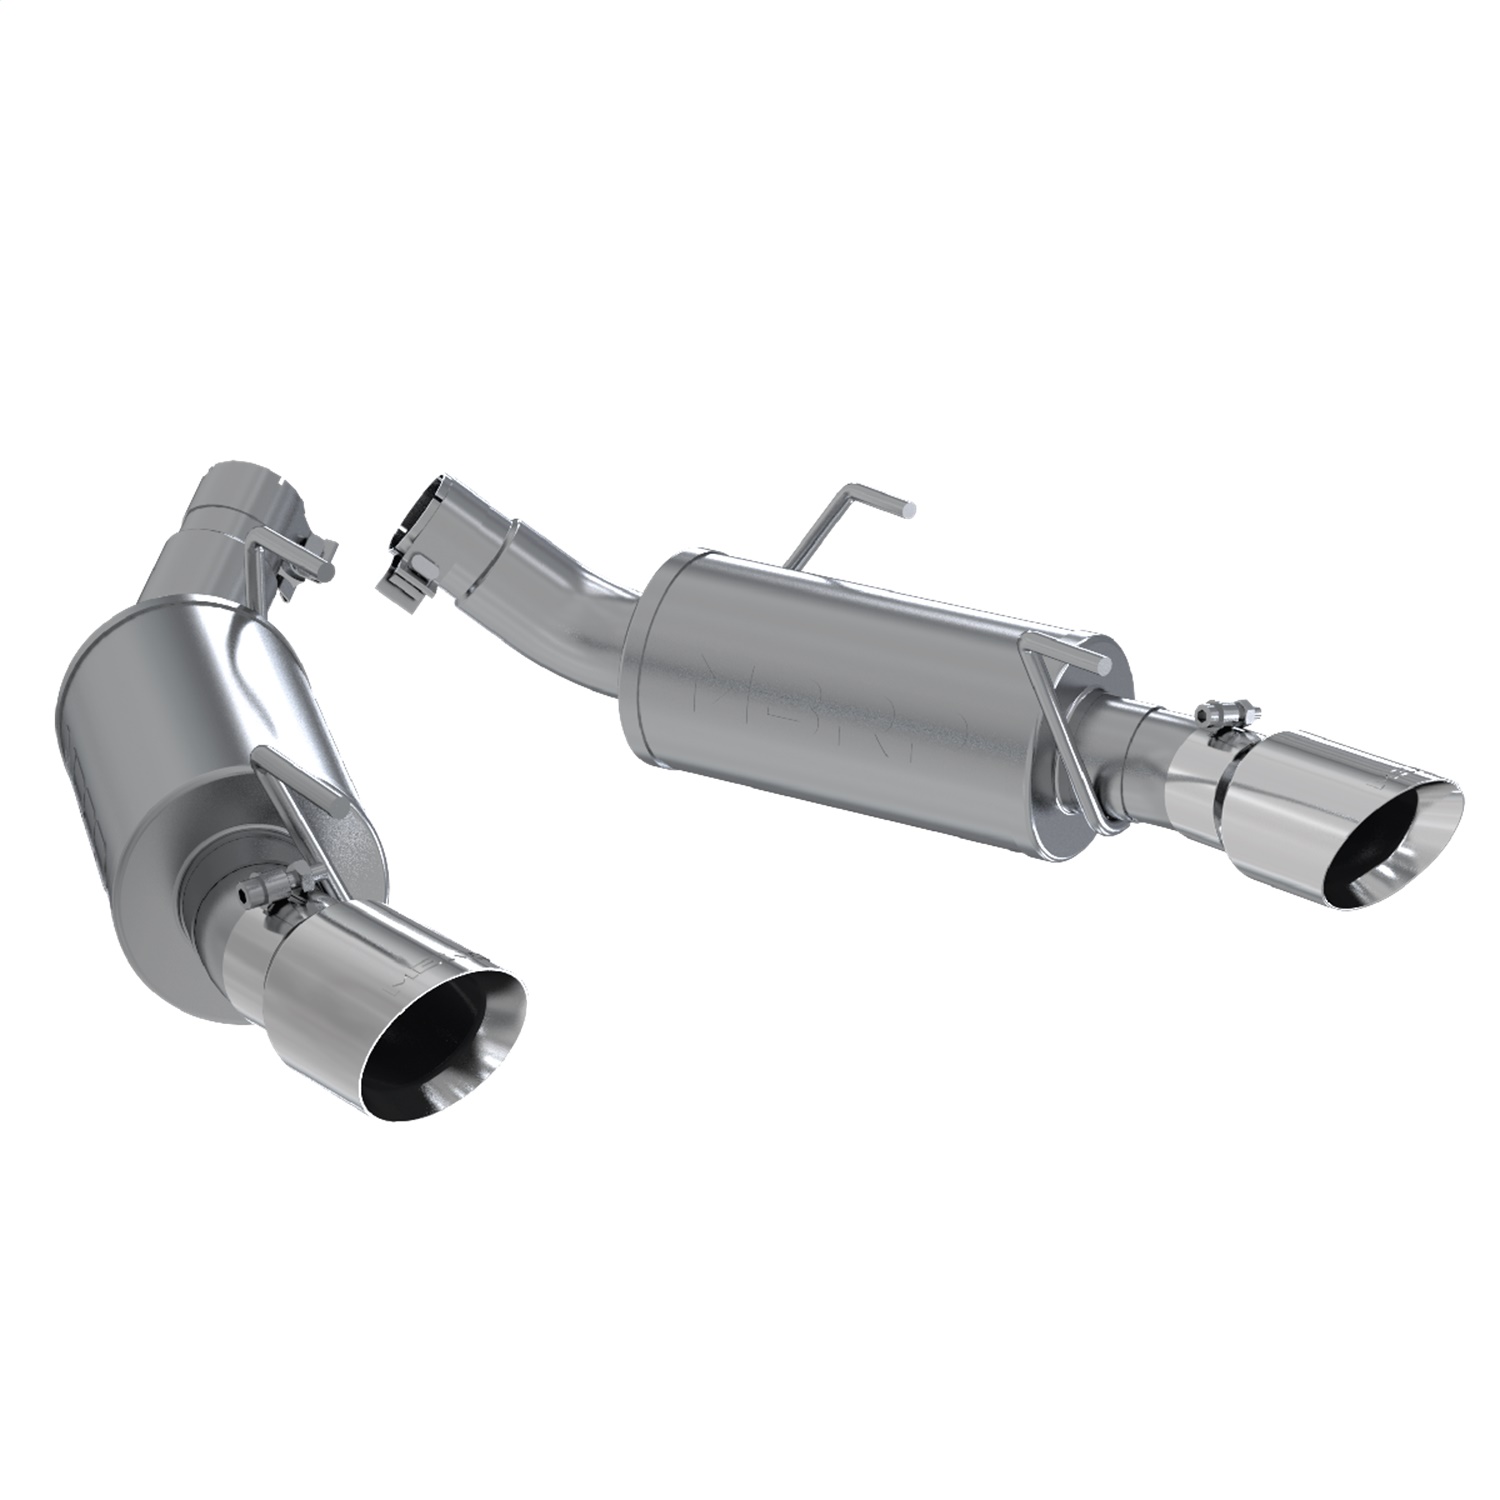 MBRP Exhaust S7200AL Armor Lite Axle Back Exhaust System Fits 05-10 Mustang